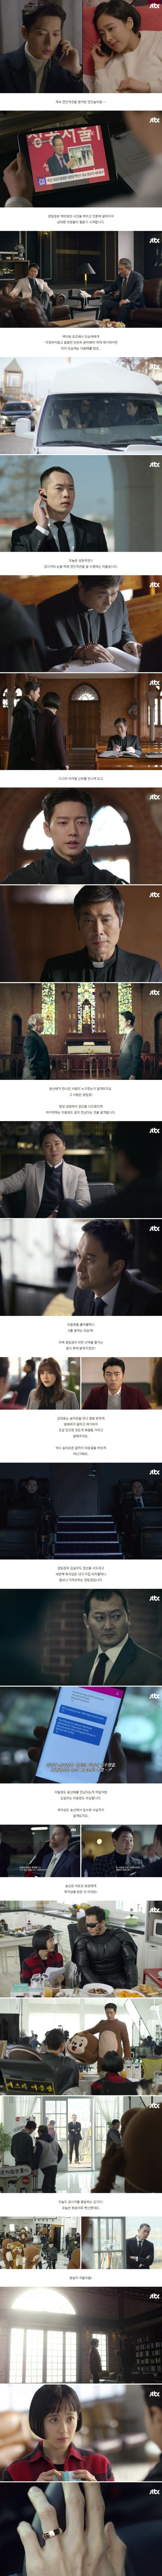 episodes 11 and 12 captures for the Korean drama 'Man to Man'